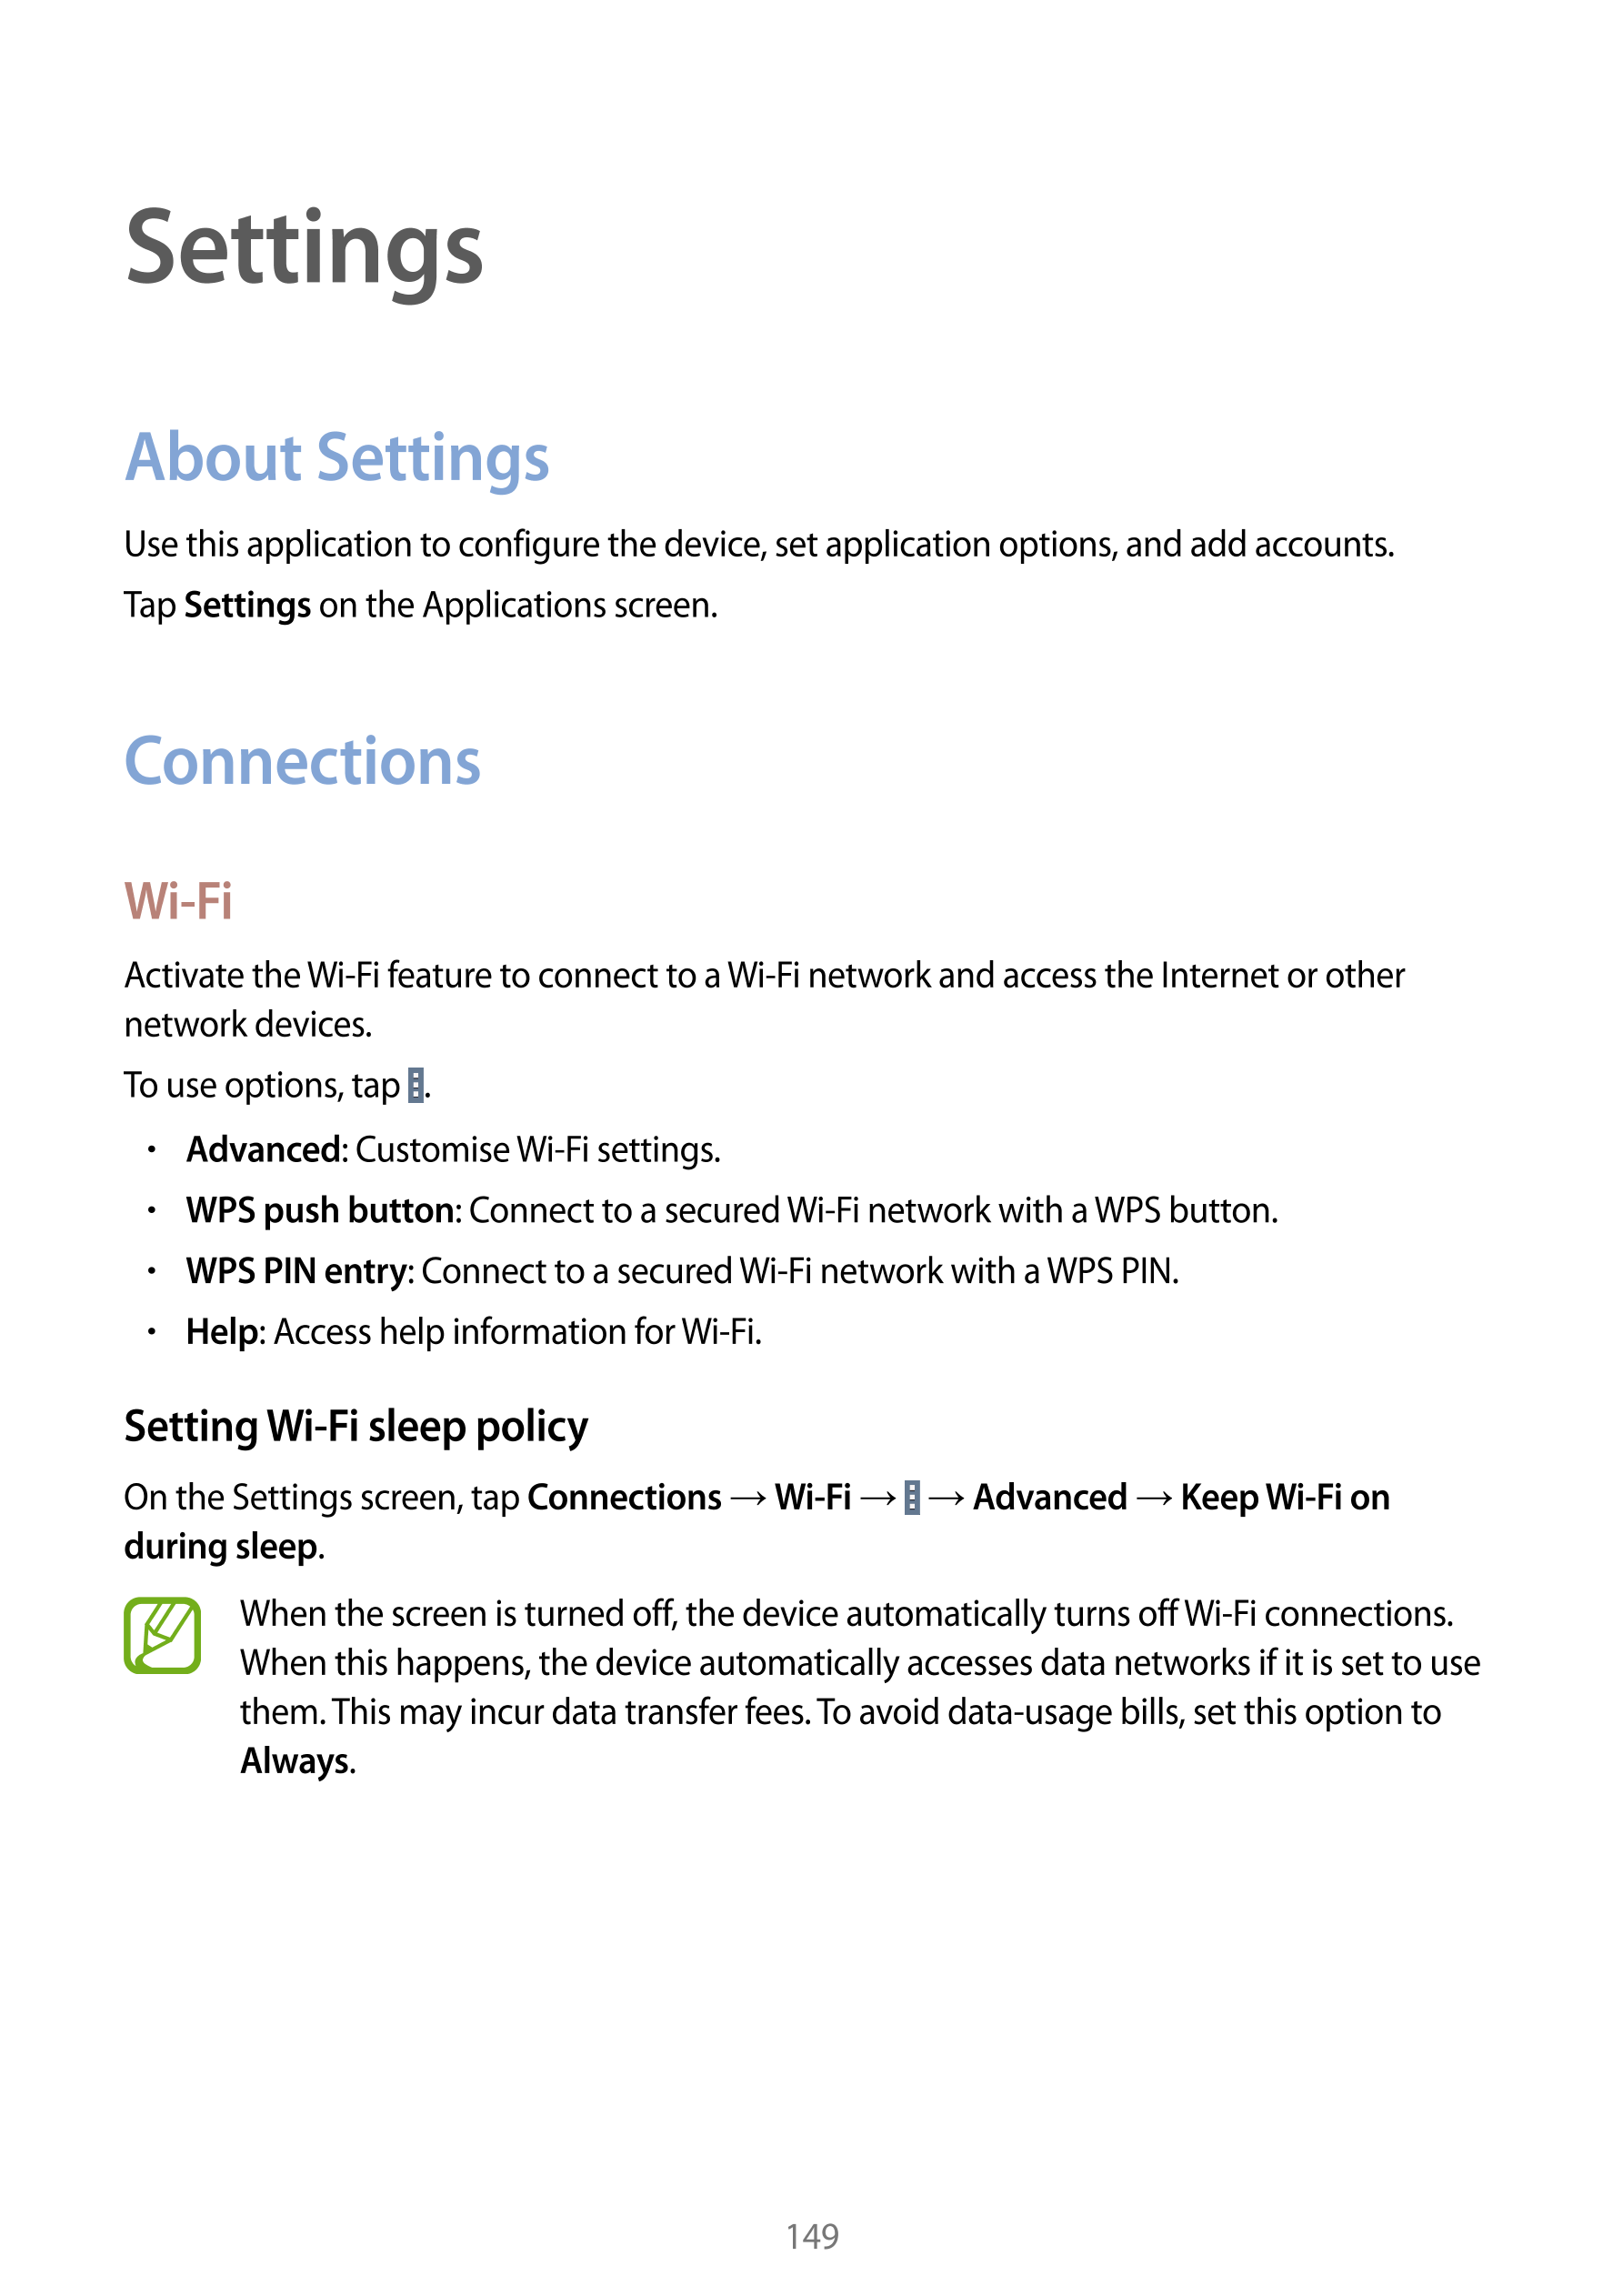 Settings
About Settings
Use this application to configure the device, set application options, and add accounts.
Tap  Settings o